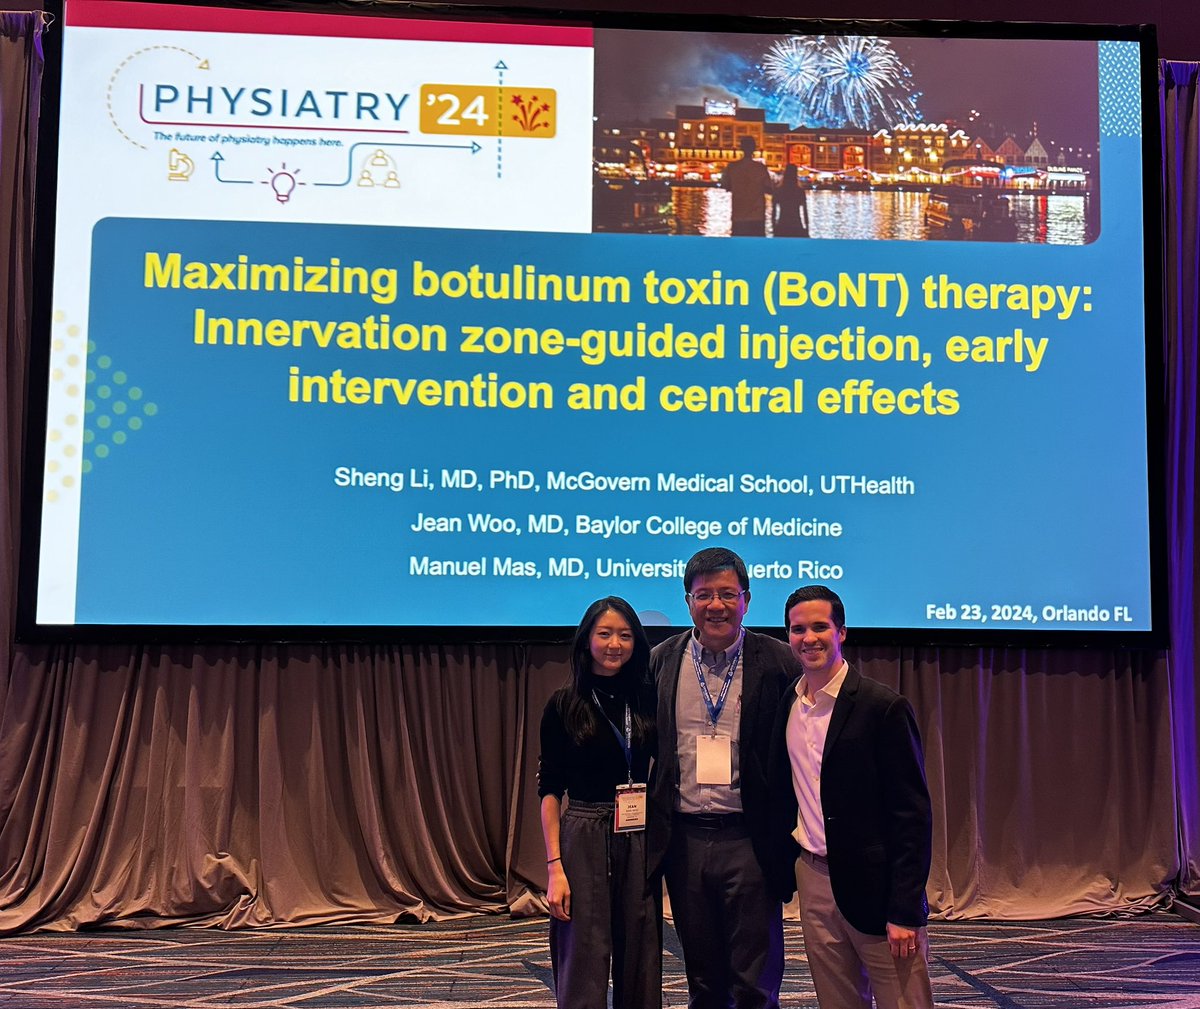 Great and proud to have a session with former fellows and colleagues on #spasticity #physiatry24 @AAPhysiatrists @JeanWooMD @BCM_PMandR @manuelfmas @UTHPMR